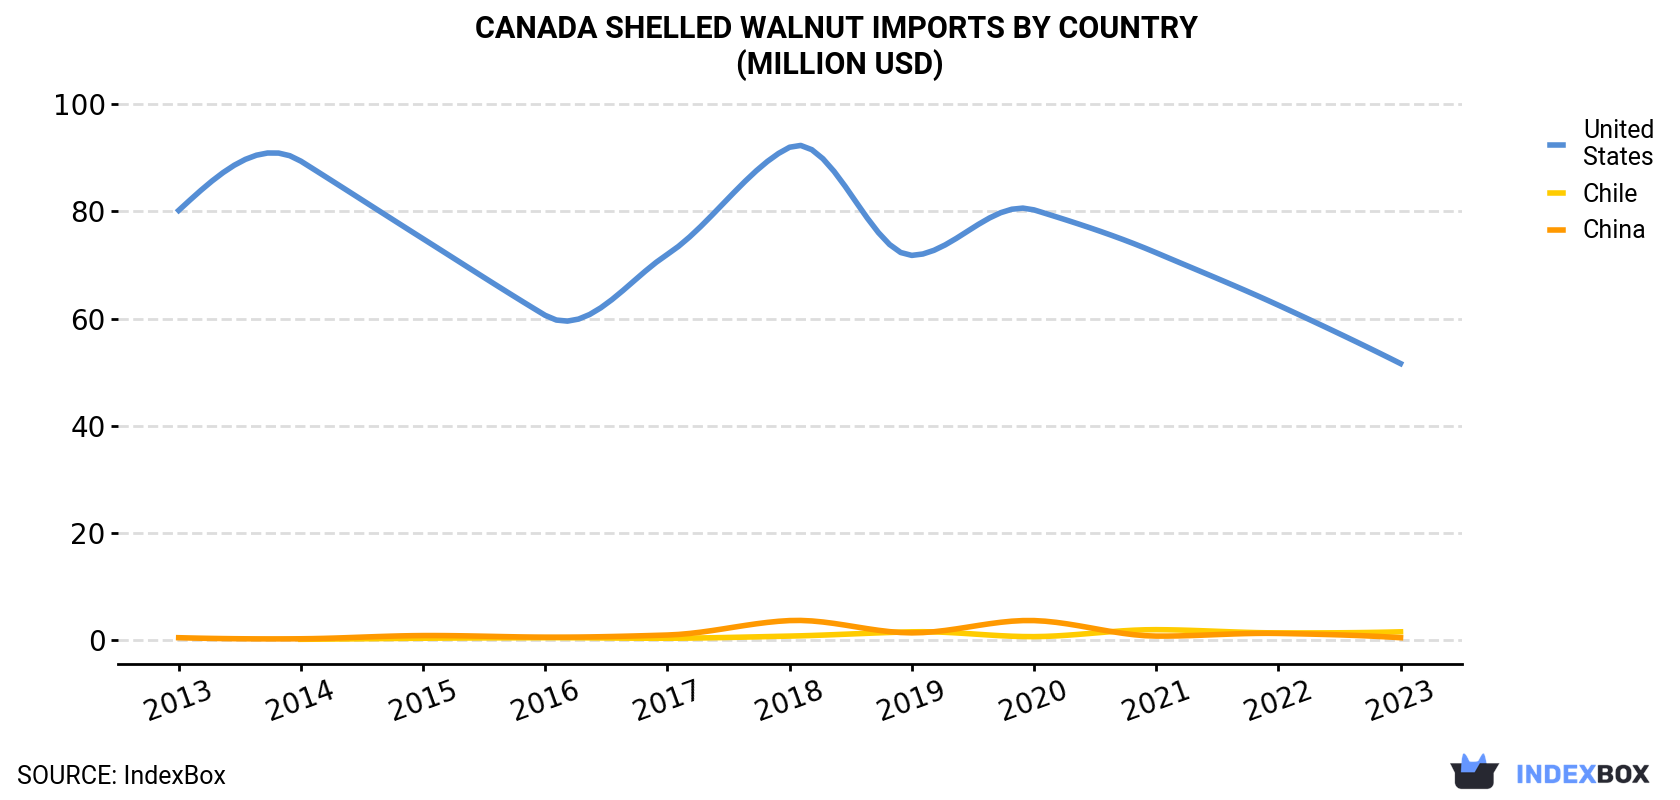 Canada Shelled Walnut Imports By Country (Million USD)